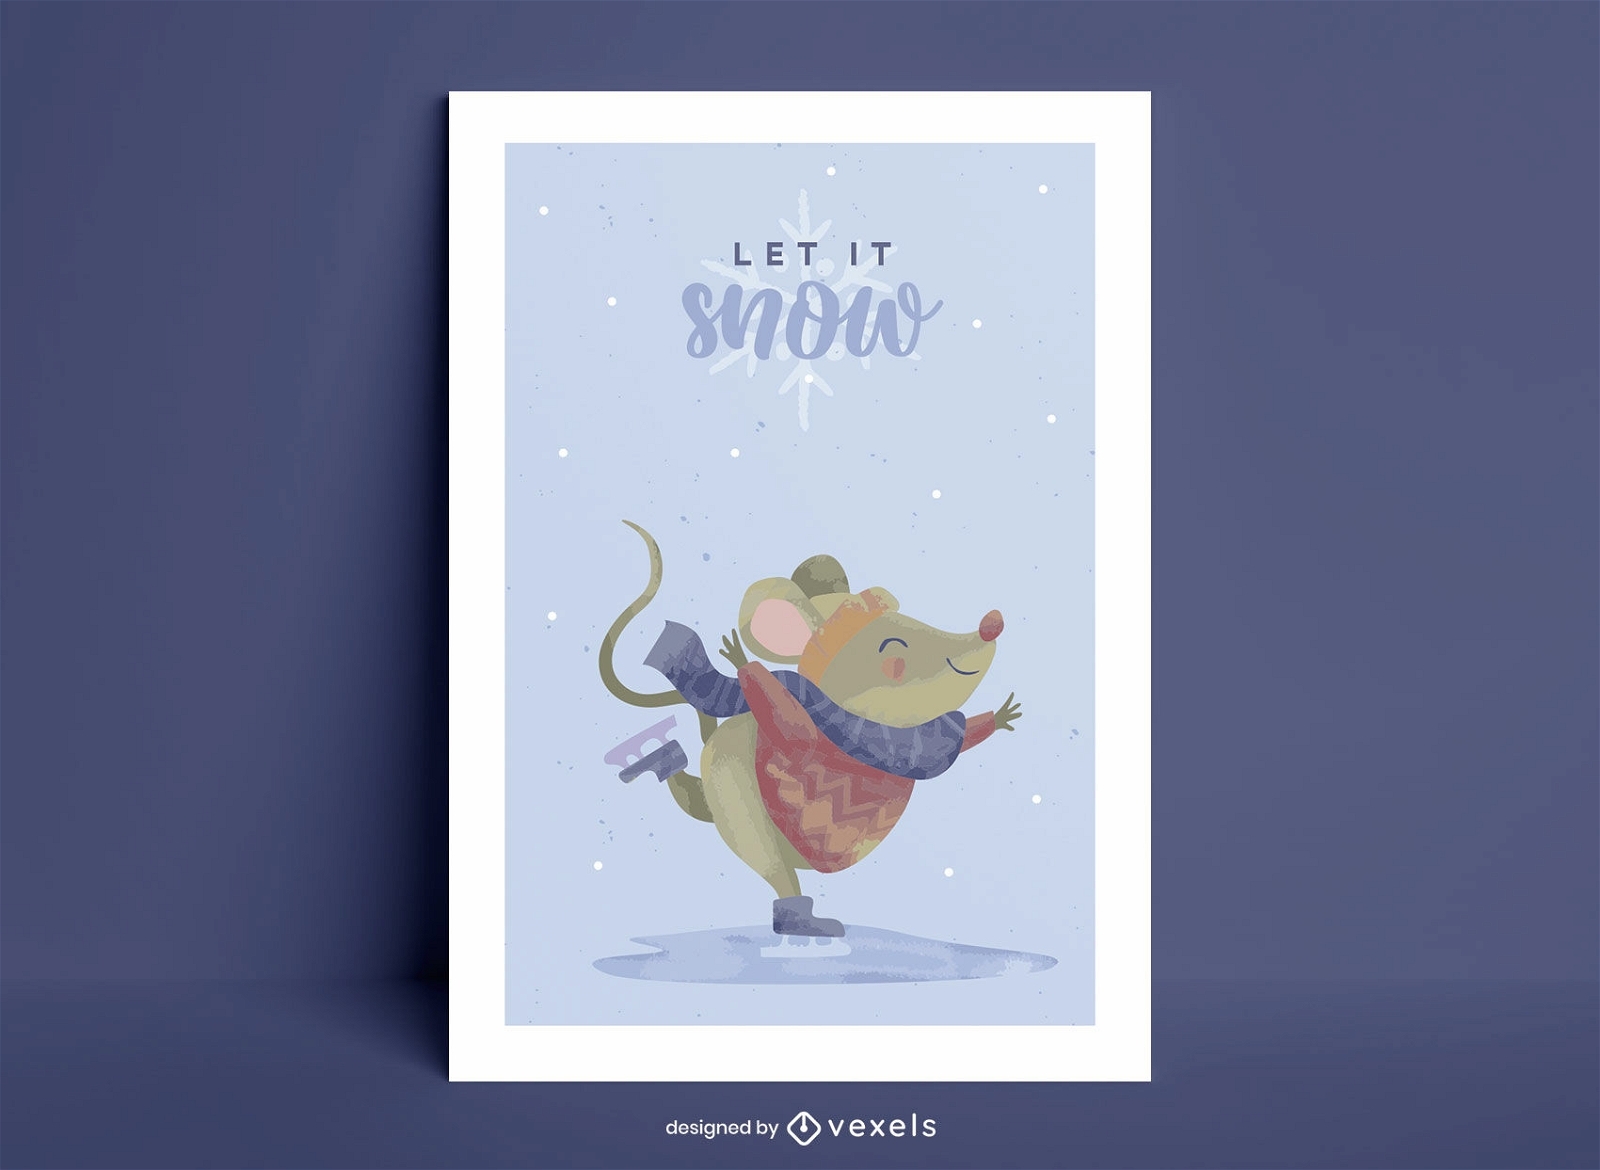 Let It Snow Mouse Quote Poster Design Vector Download